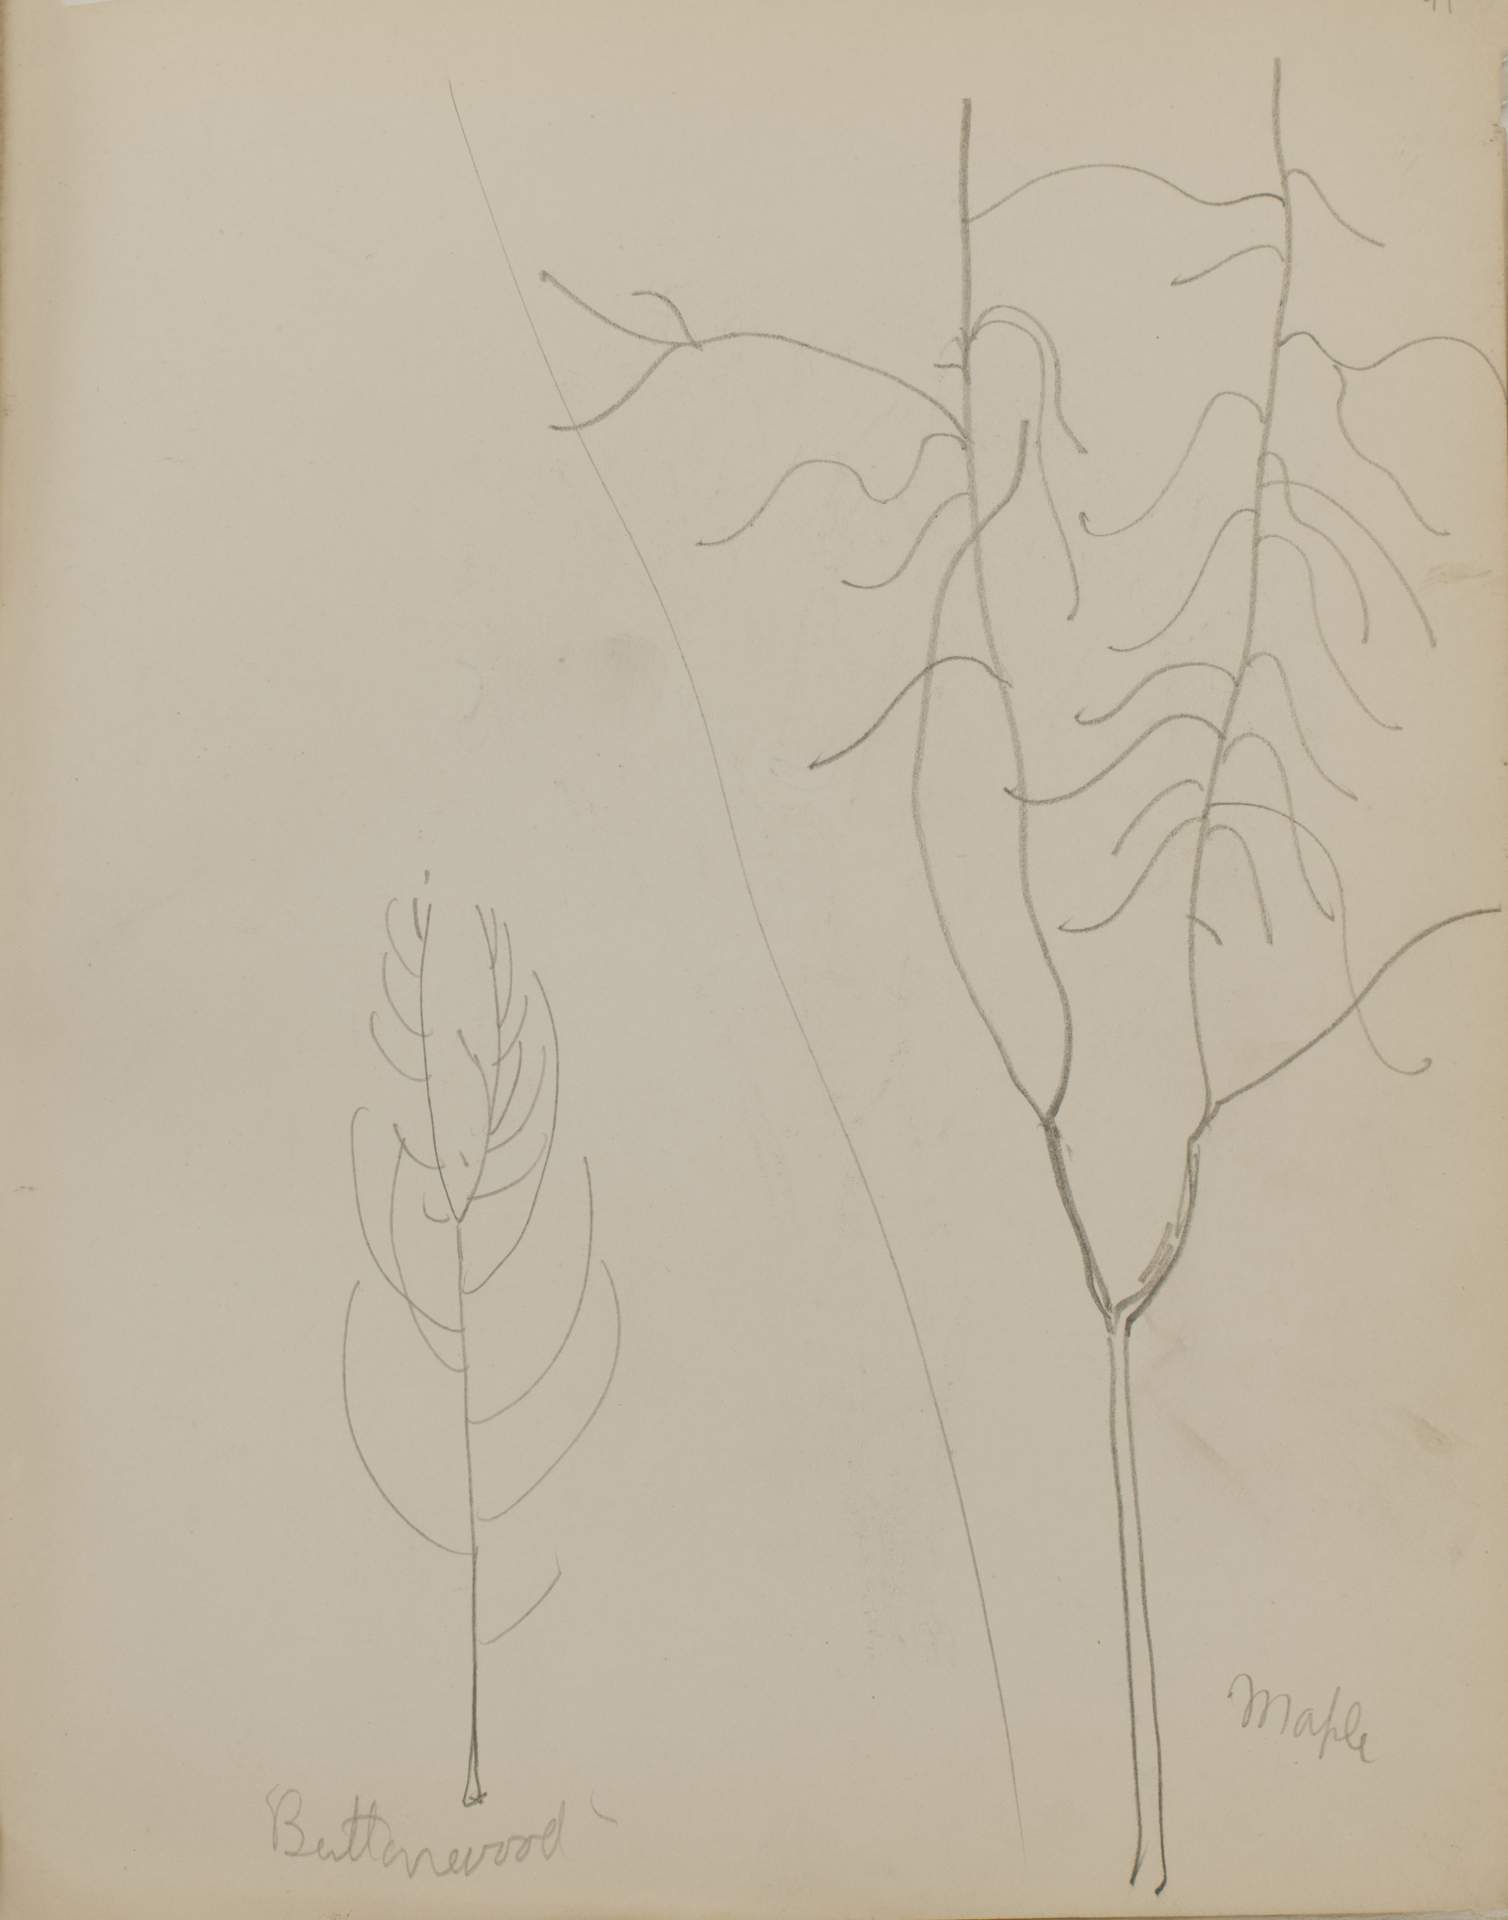 Untitled (sketch of maple and buttonwood trees)